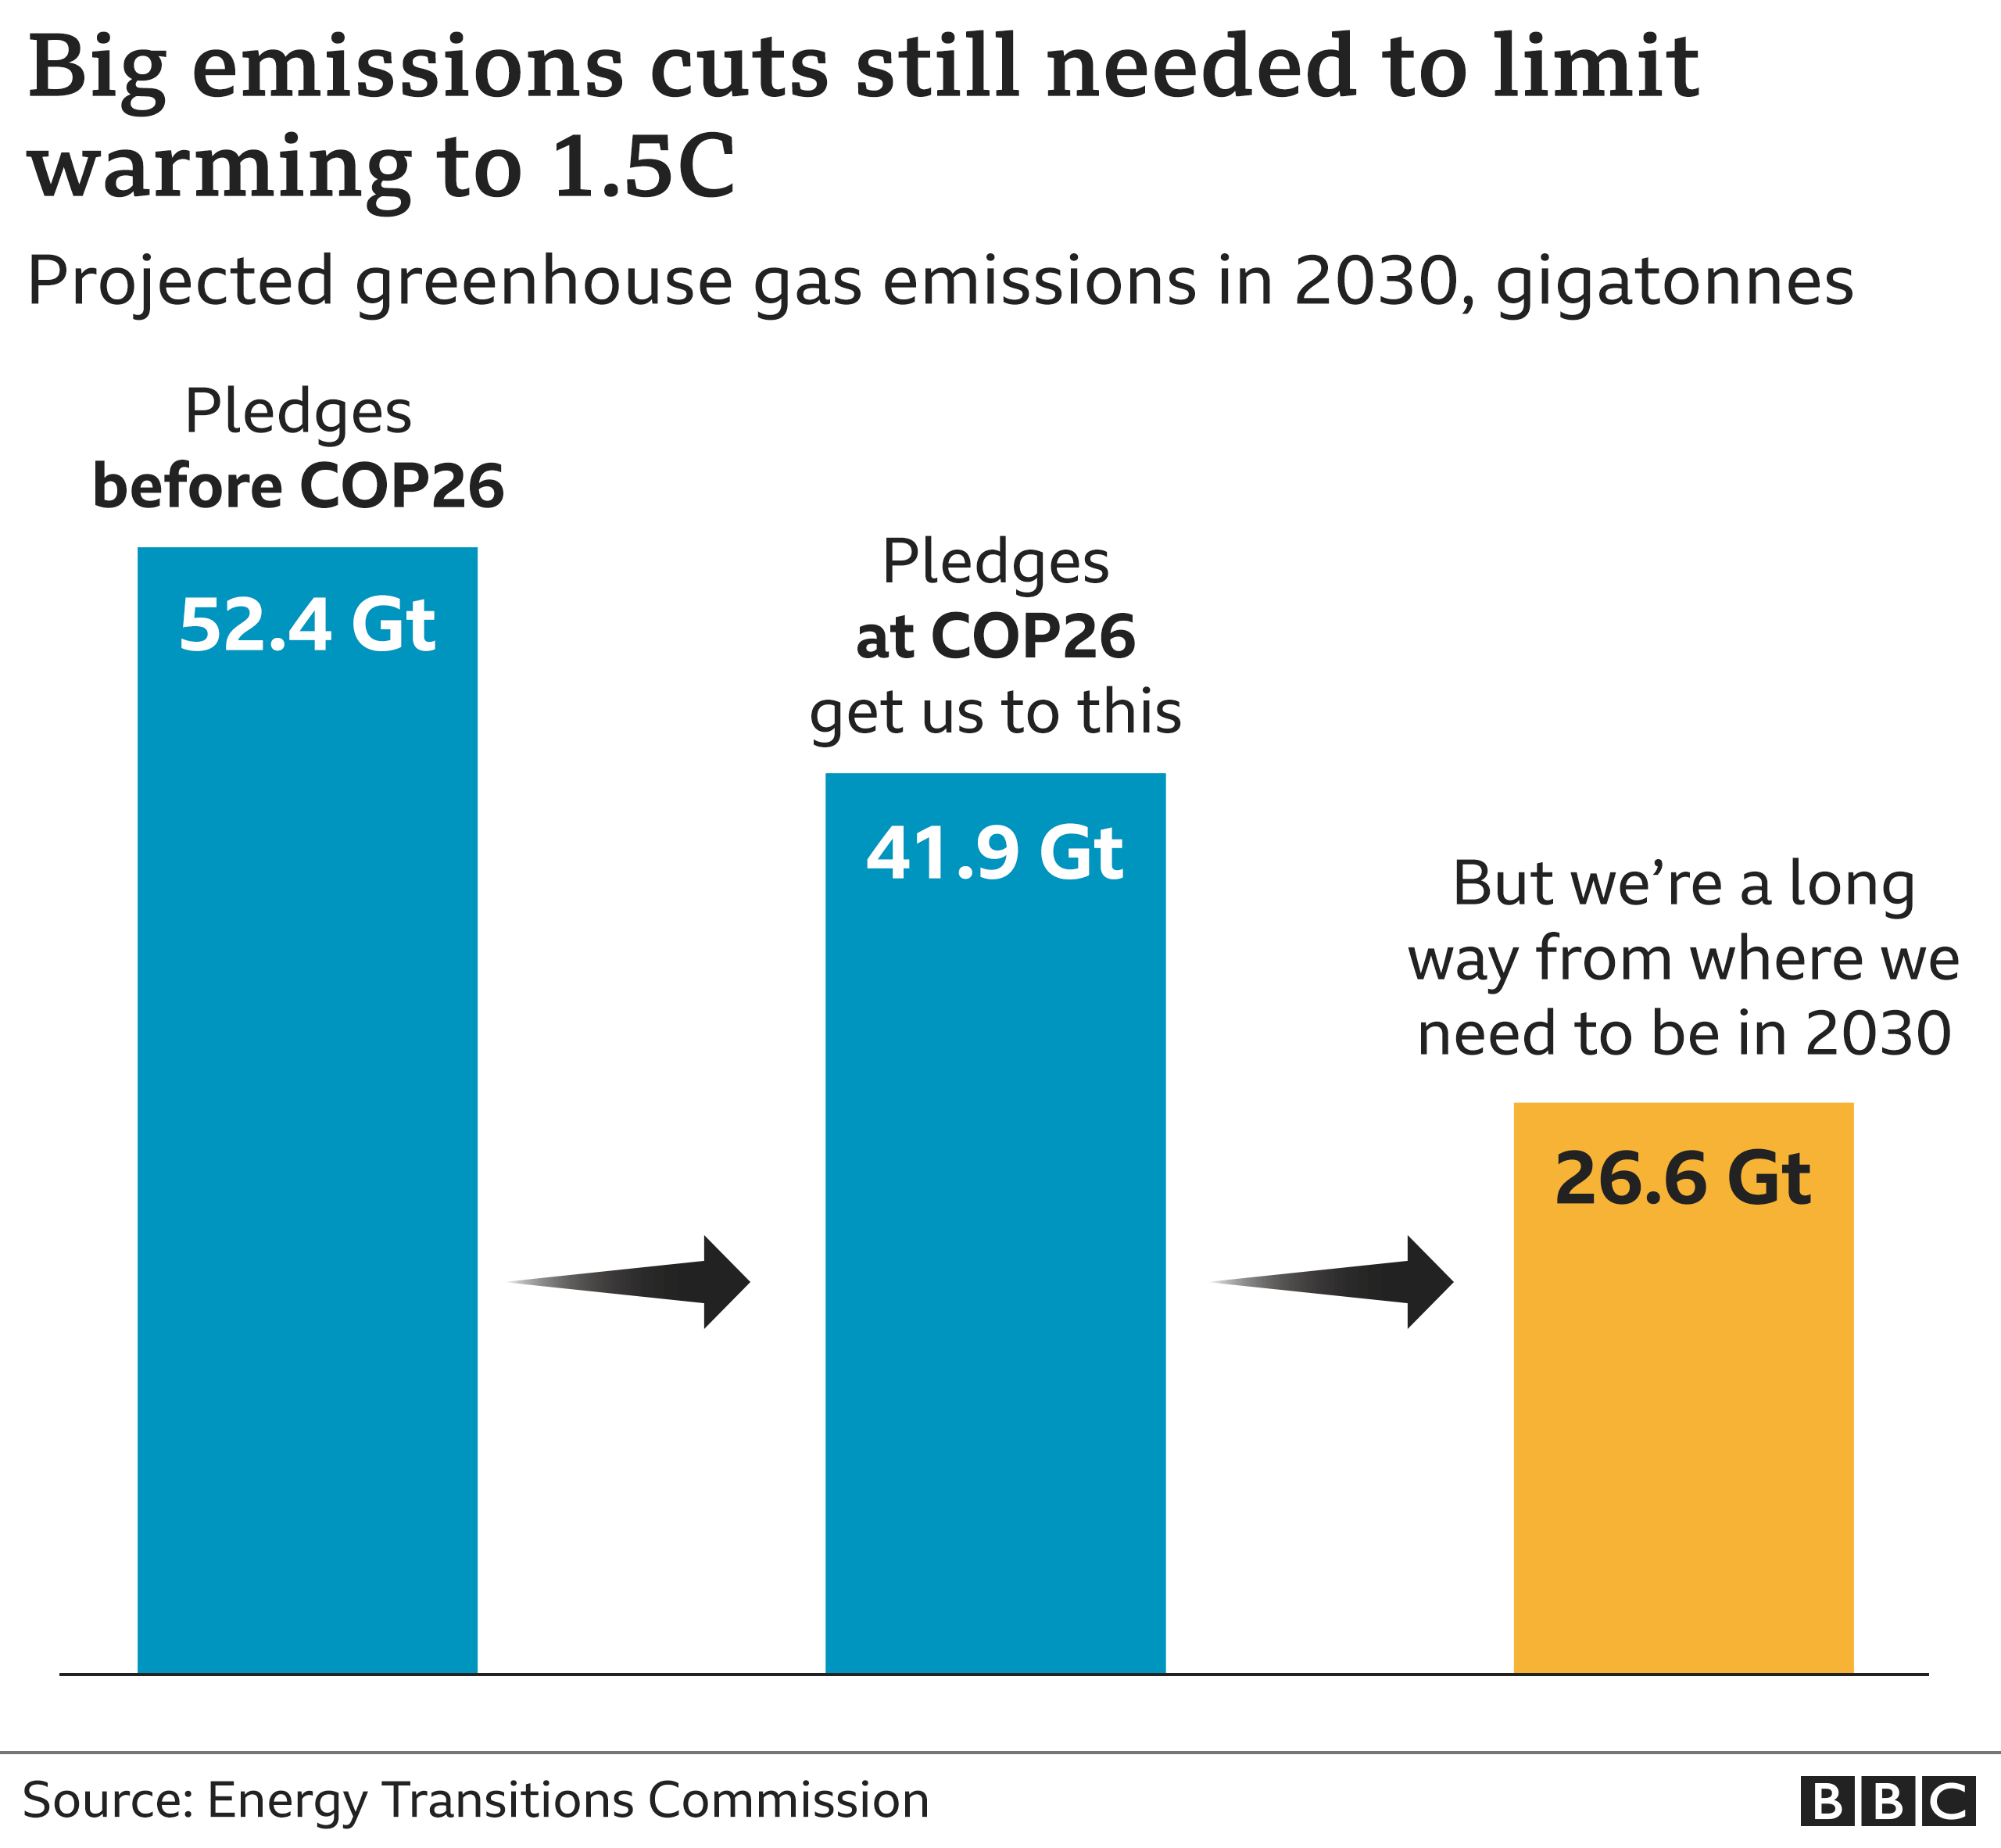 IMAGE(https://ichef.bbci.co.uk/news/976/cpsprodpb/16F79/production/_121537049_cop26_emissions_target_640x2-nc.png)